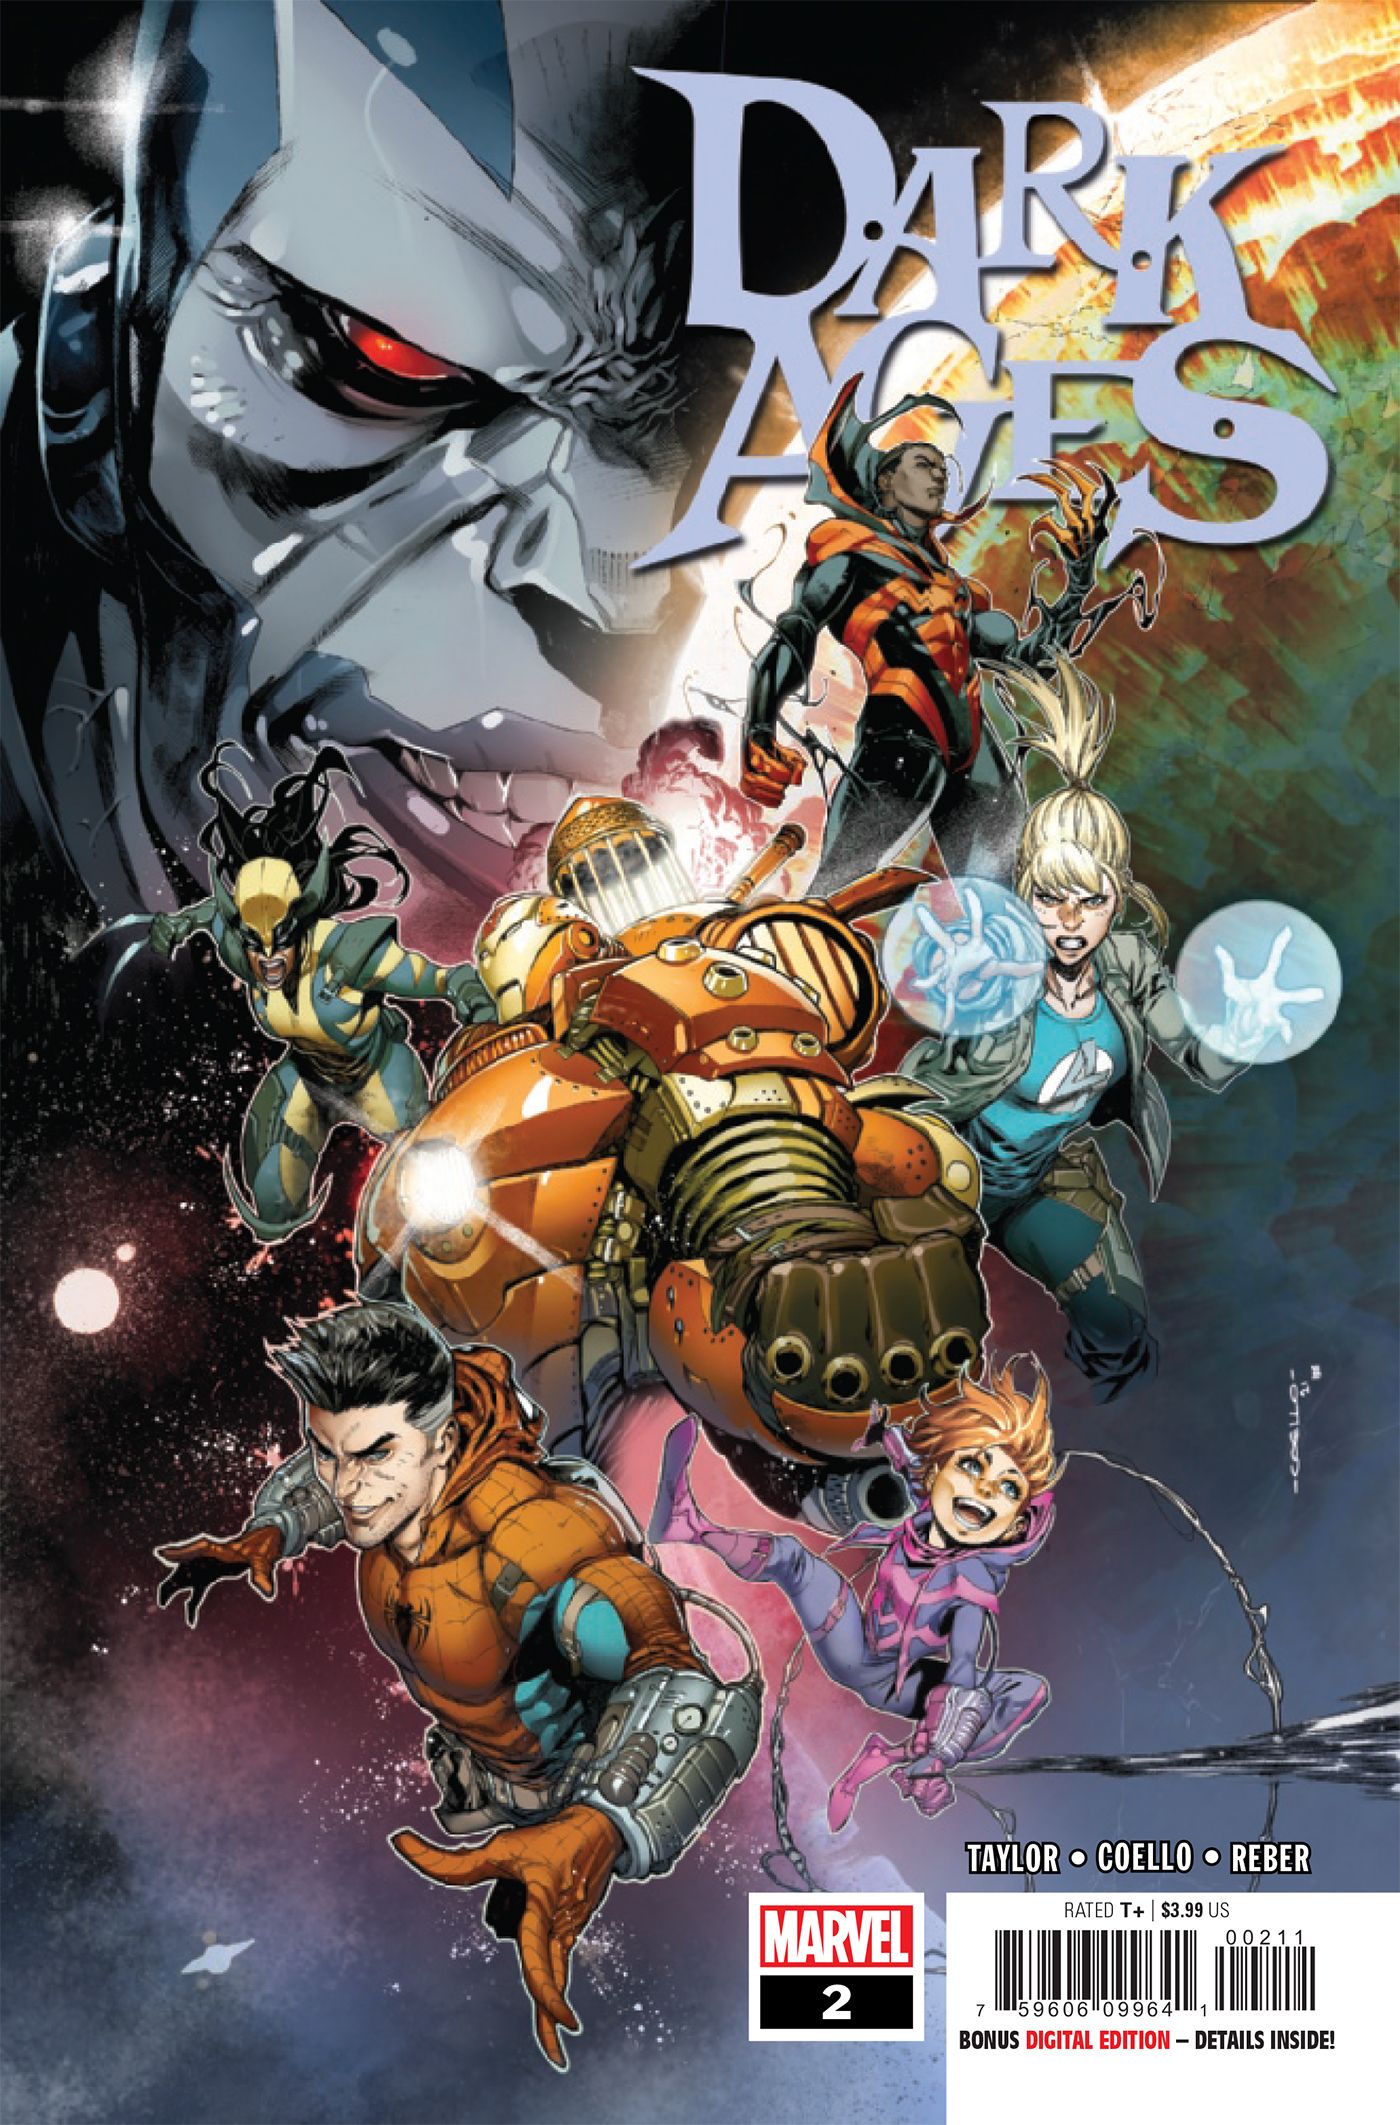 The cover for Dark Ages #2 shows the heroes and villains of the new Marvel universe.